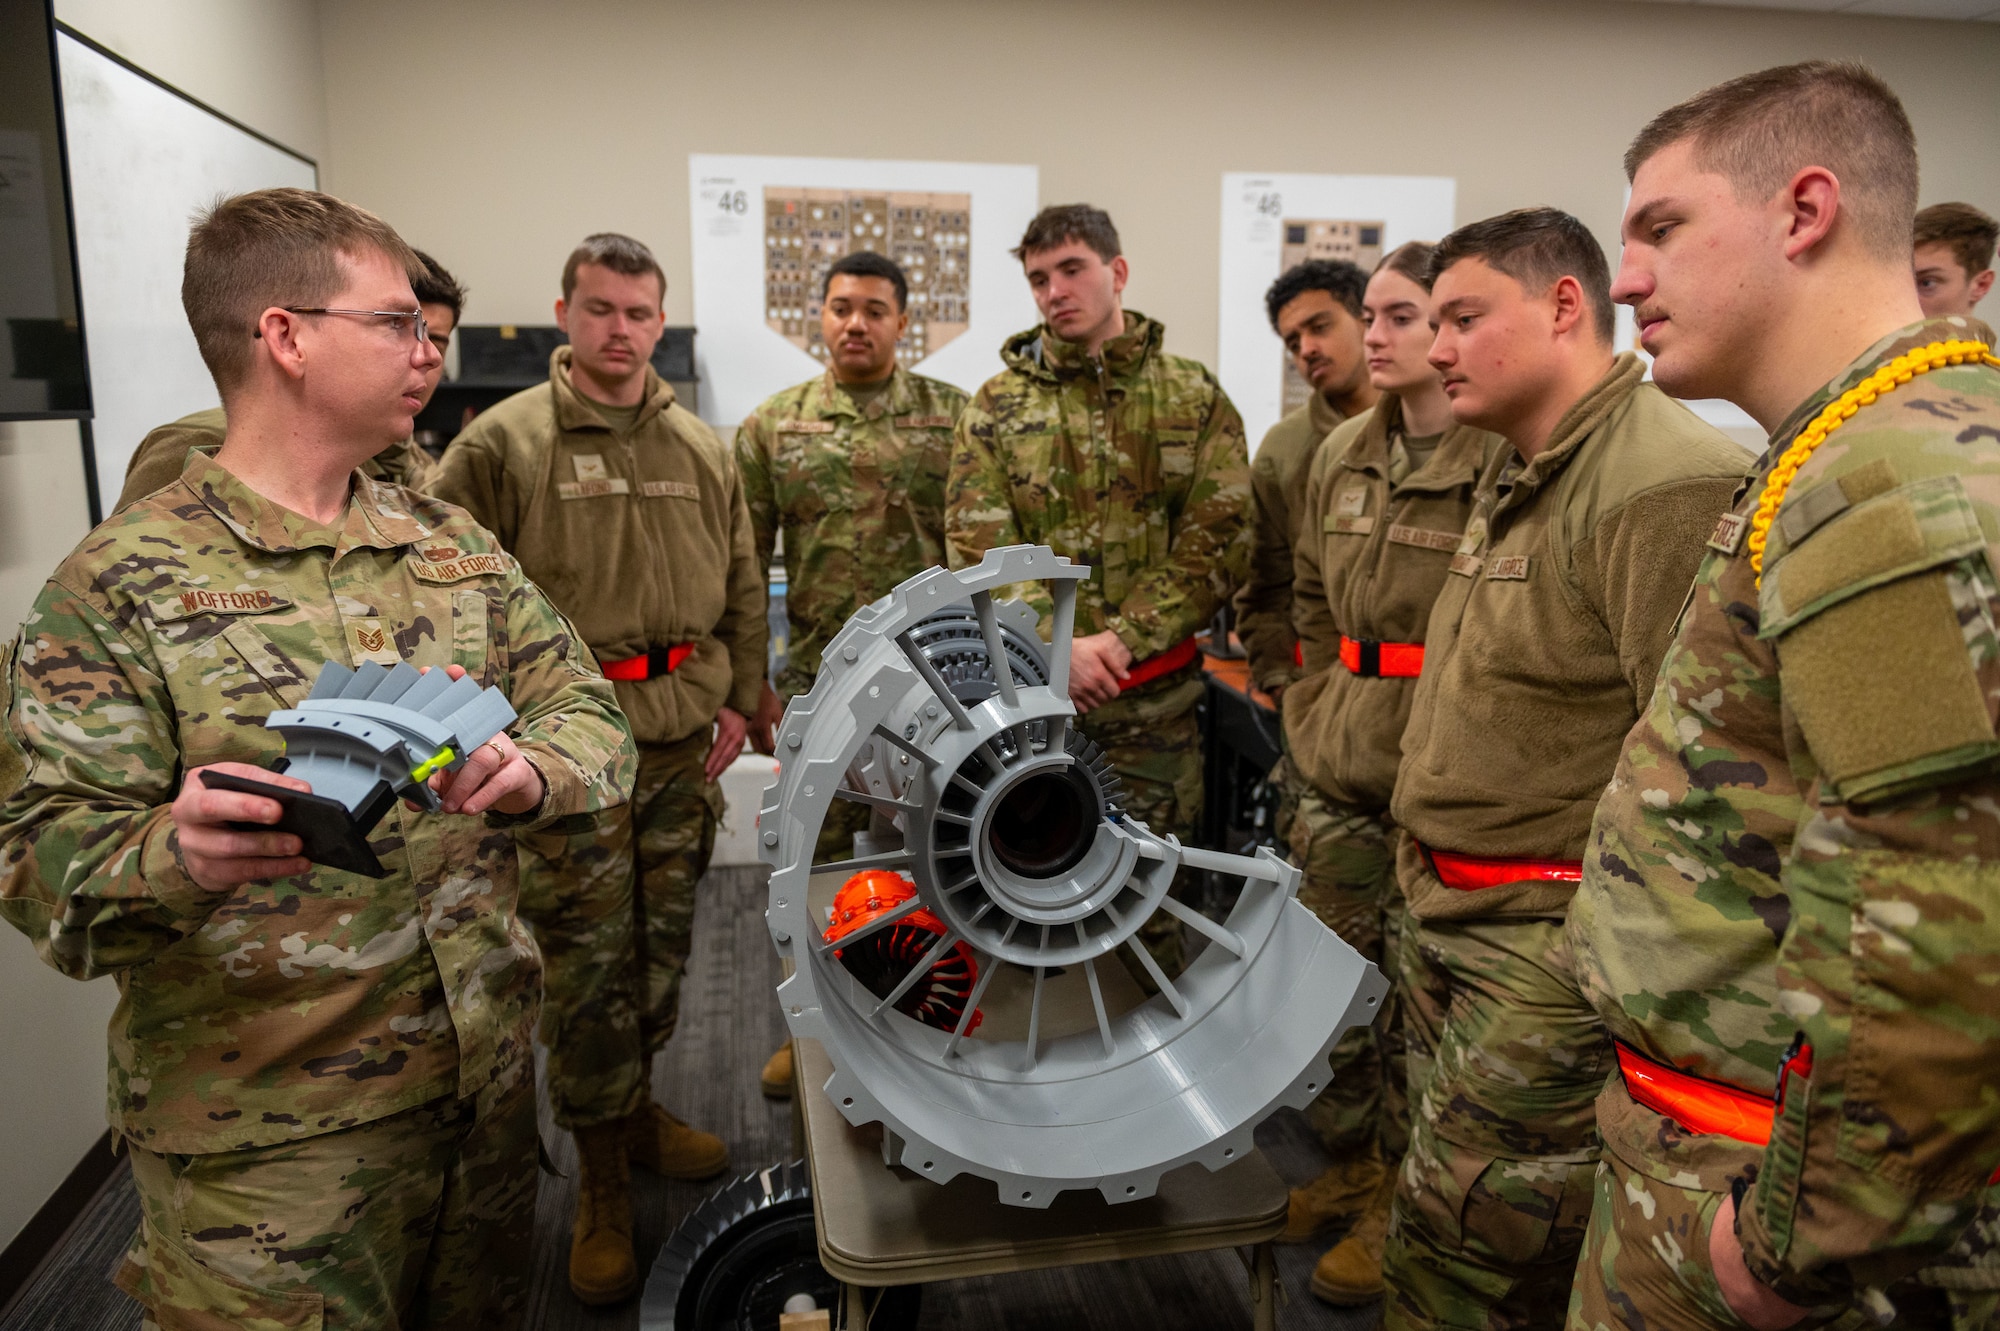 Tech. Sgt. Shane Wofford, 373rd Training Squadron Detachment 8 propulsion instructor, teaches technical school Airmen on how to identify the number one fan blade of a turbofan engine Feb. 24, 2023, at McConnell Air Force Base, Kansas. Wofford utilized a 3D printed model of a turbofan engine that he created for the dsetachment. (U.S. Air Force photo by Airman 1st Class Brenden Beezley)